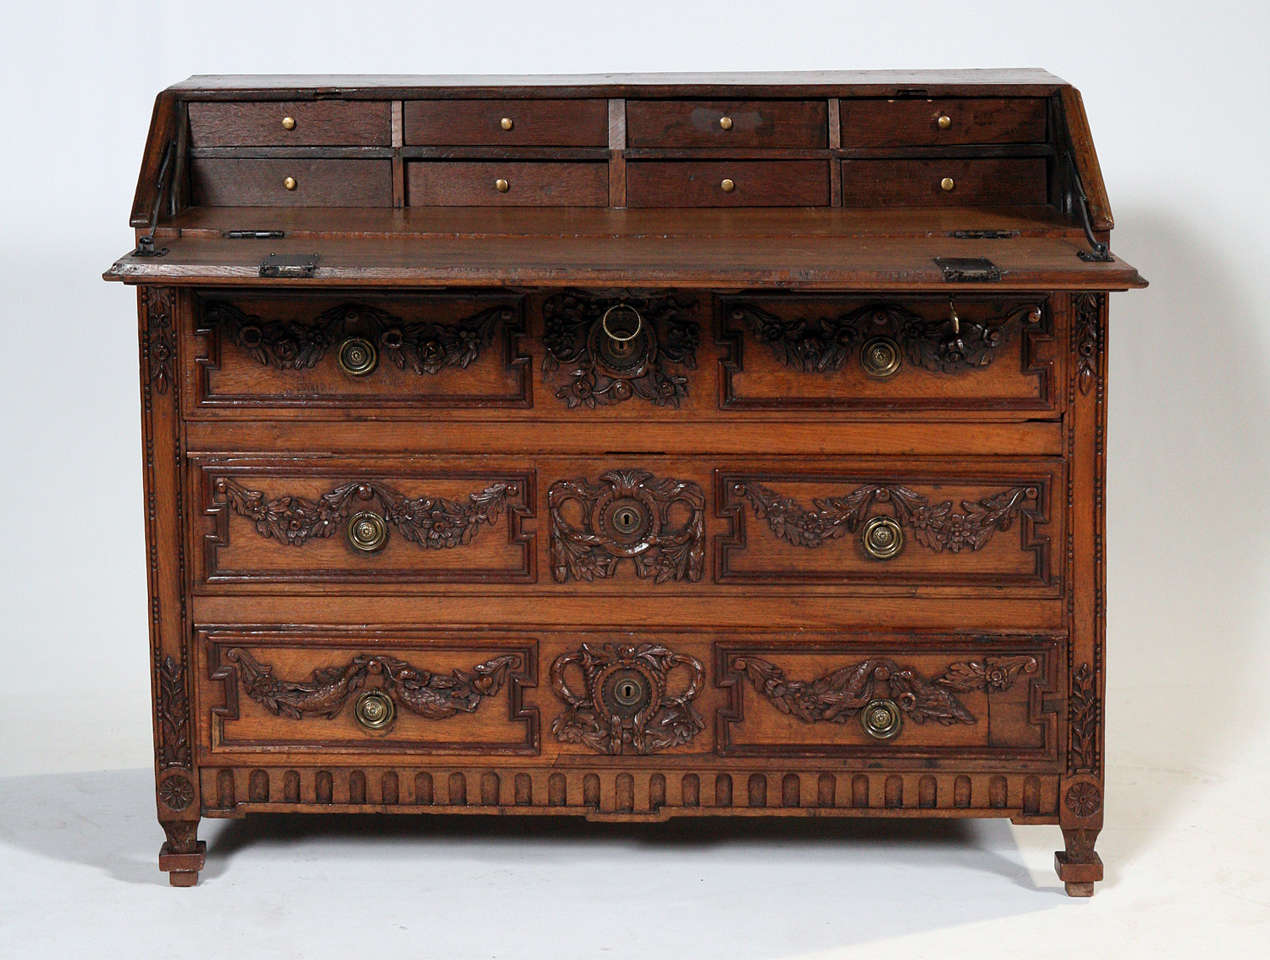 An elegant Louis XVI style white oak provincial desk commode. This piece is decorated with amazing raised carvings of laurel swags and floral designs. This is cleverly repeated from the slant down to the three drawers. Centered is a finely